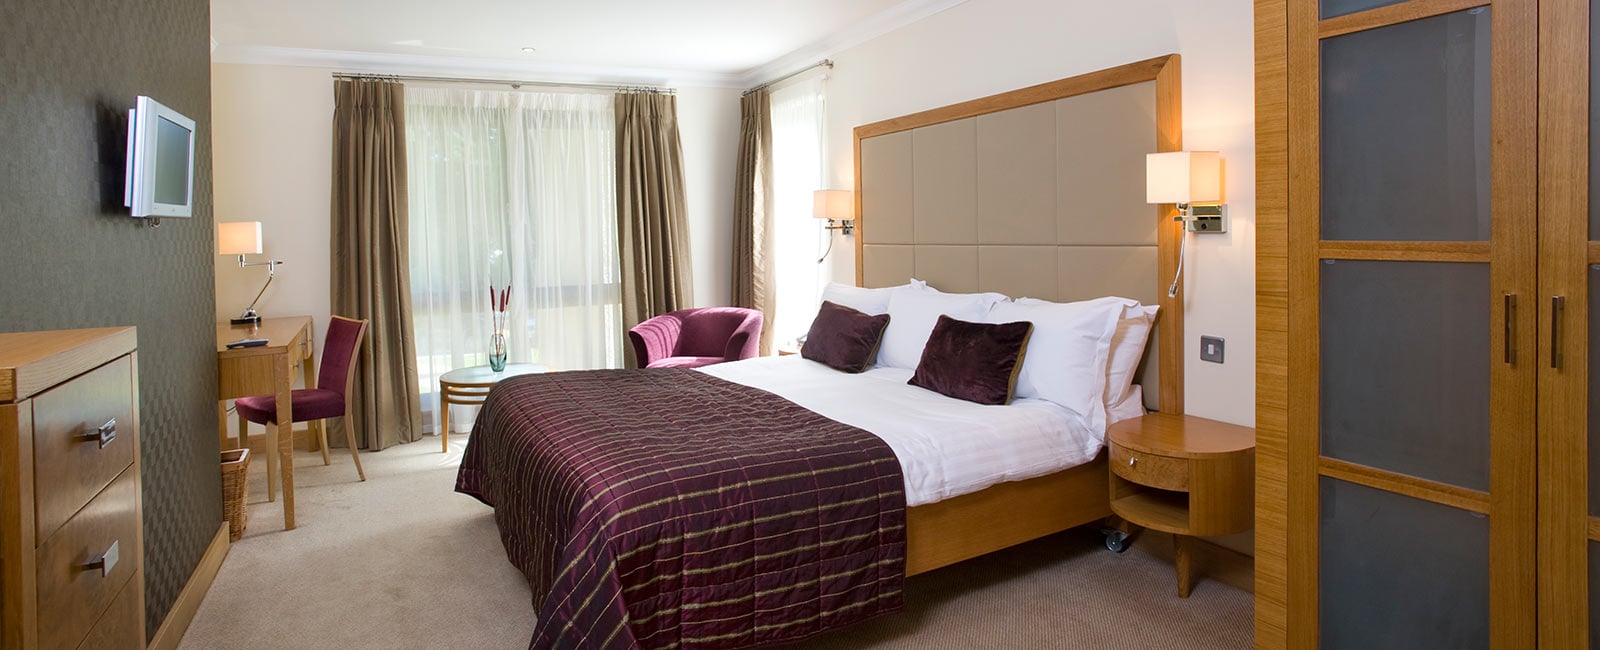 HBedroom at Dunkeld House Lodges, Managed by Hilton Grand Vacations in Perthshire, Scotland